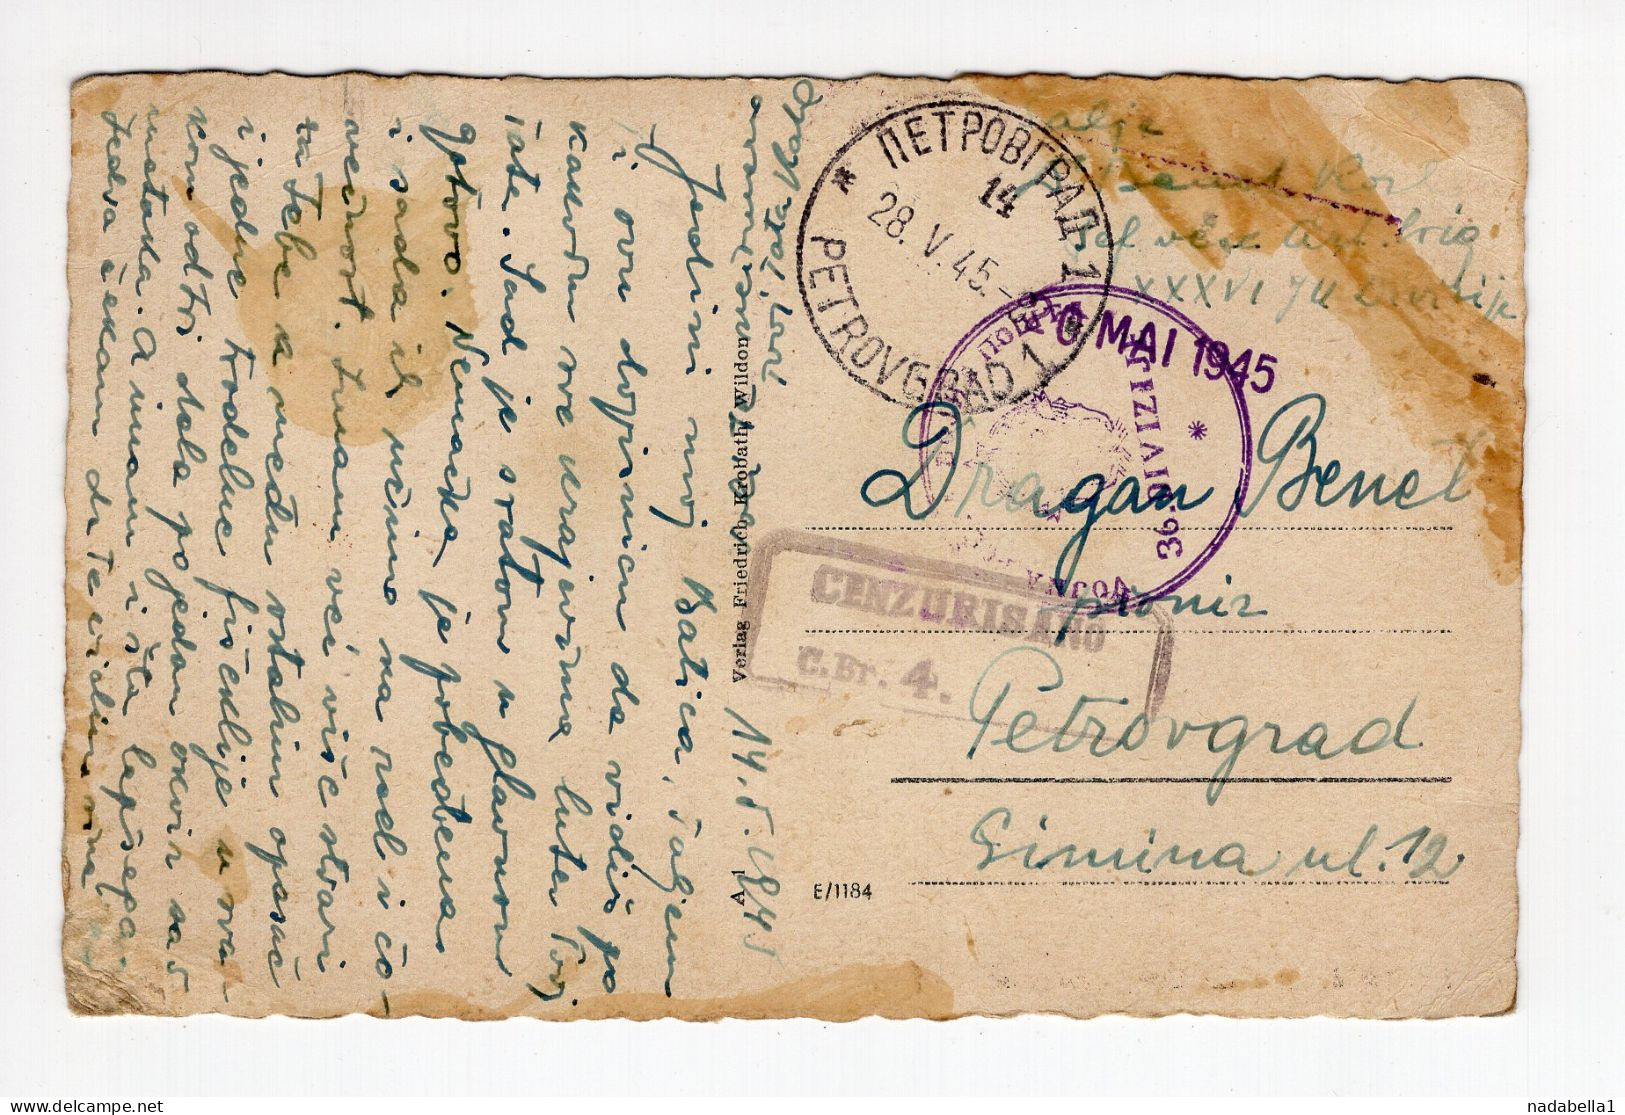 14.5.1945. YUGOSLAVIA,MILITARY,PARTIZAN MAIL,CENSOR,36 DIVISION,FROM FRONT LINE,AUSTRIA? TO SERBIA,POSTCARD,USED - Lettres & Documents